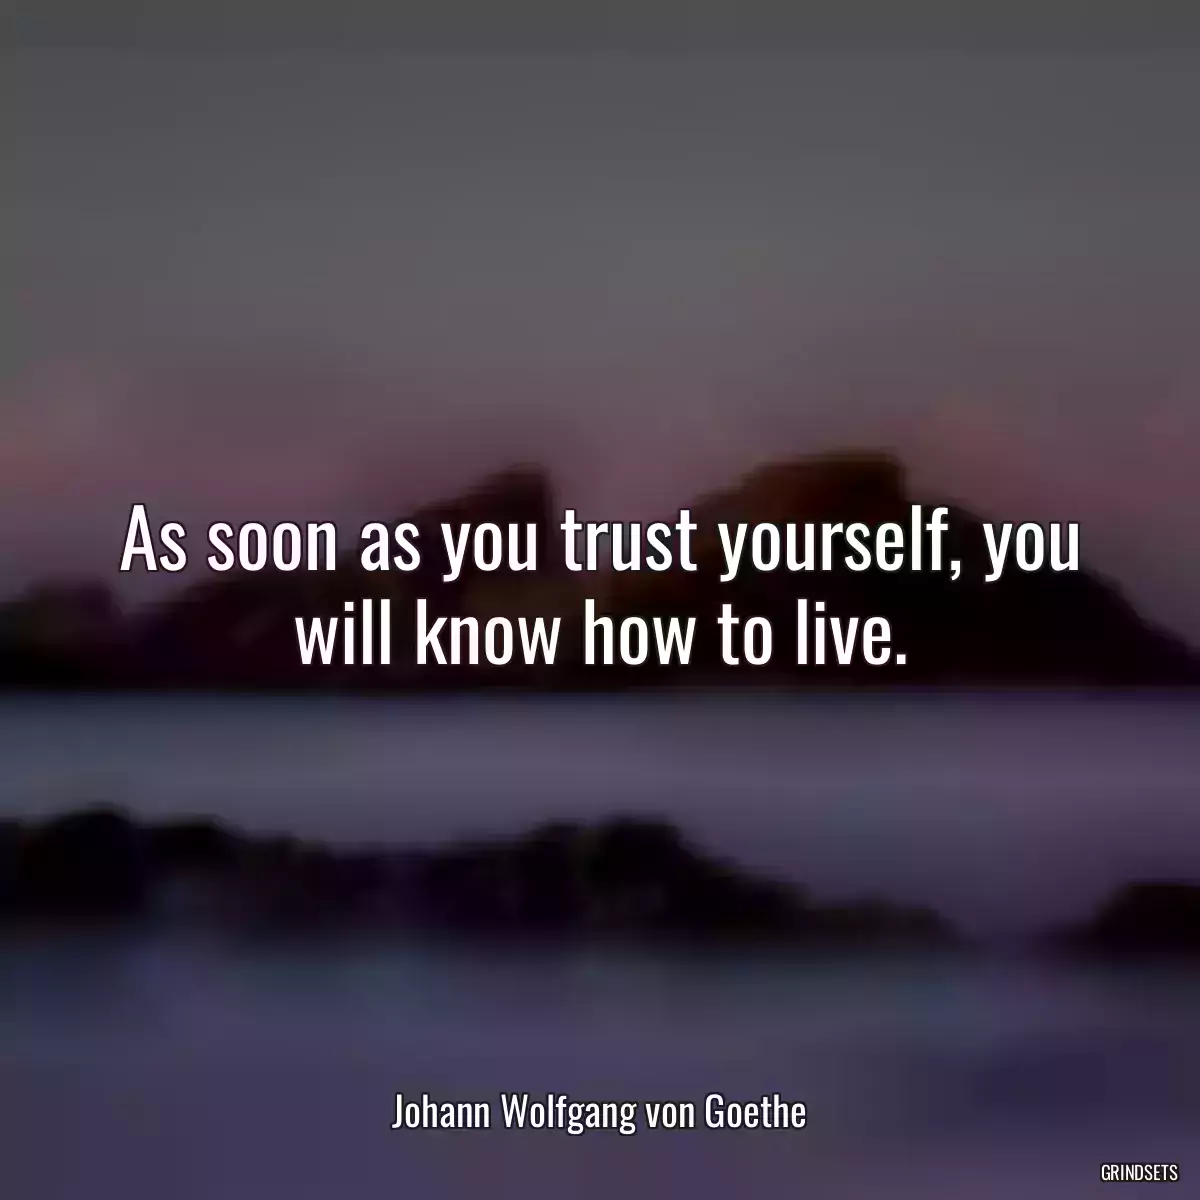 As soon as you trust yourself, you will know how to live.